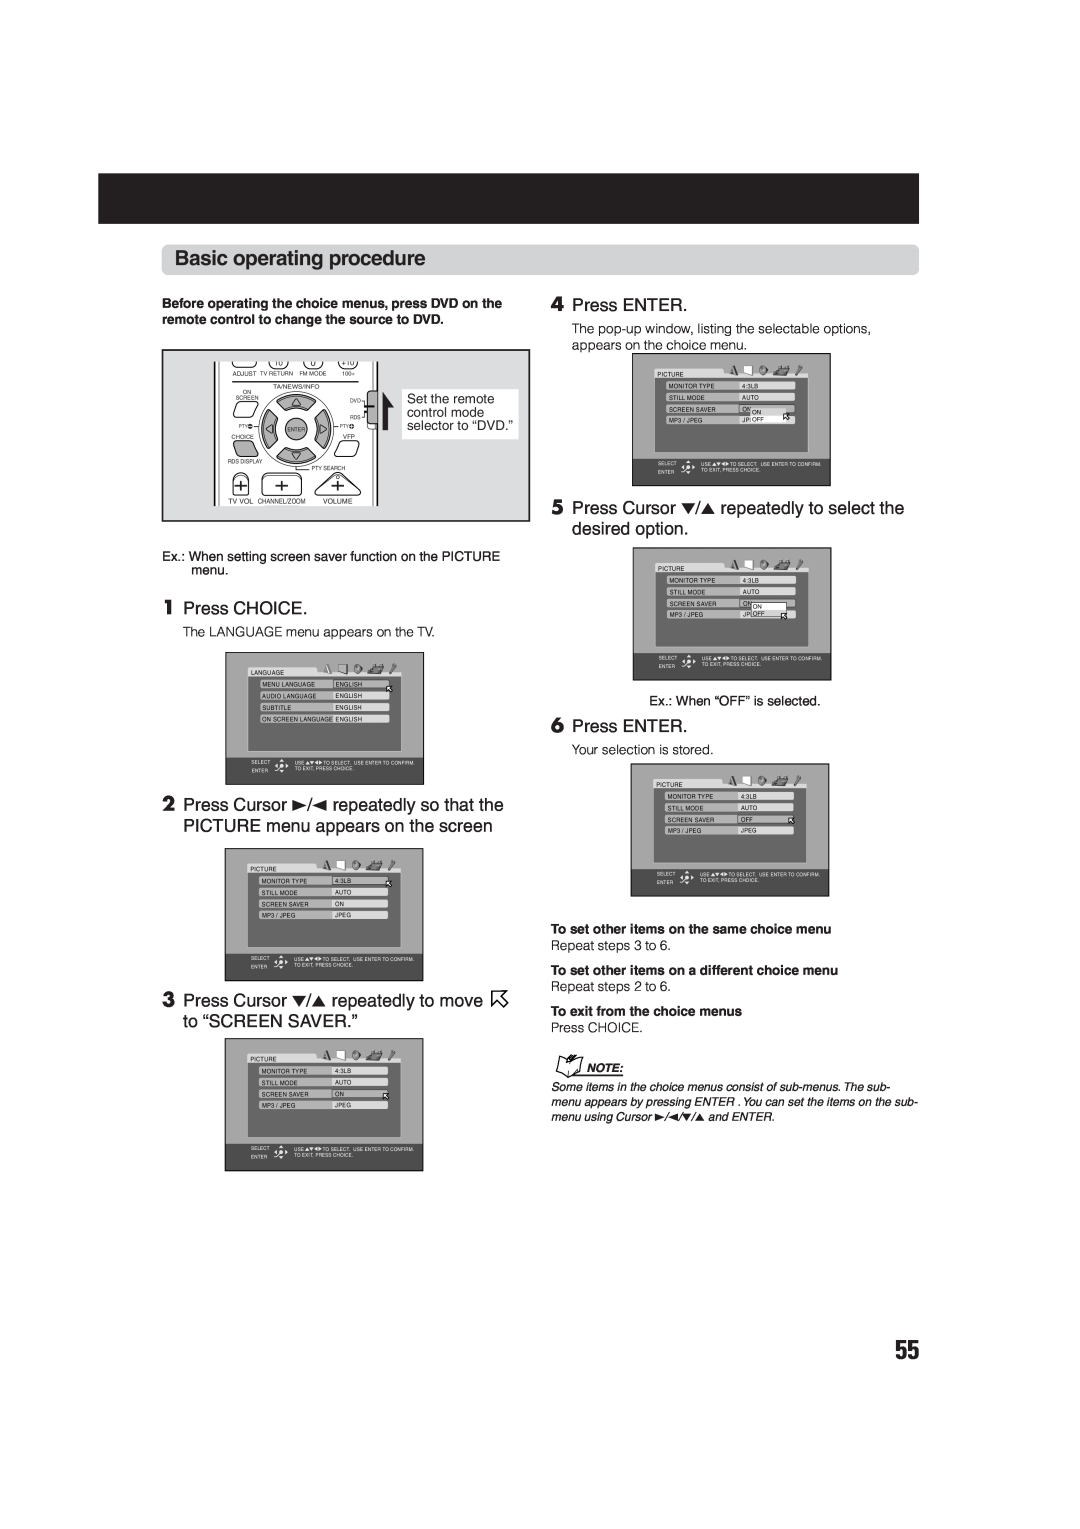 JVC SP-WA75, TH-A75R Basic operating procedure, 1Press CHOICE, 6Press ENTER, 4Press ENTER, To exit from the choice menus 